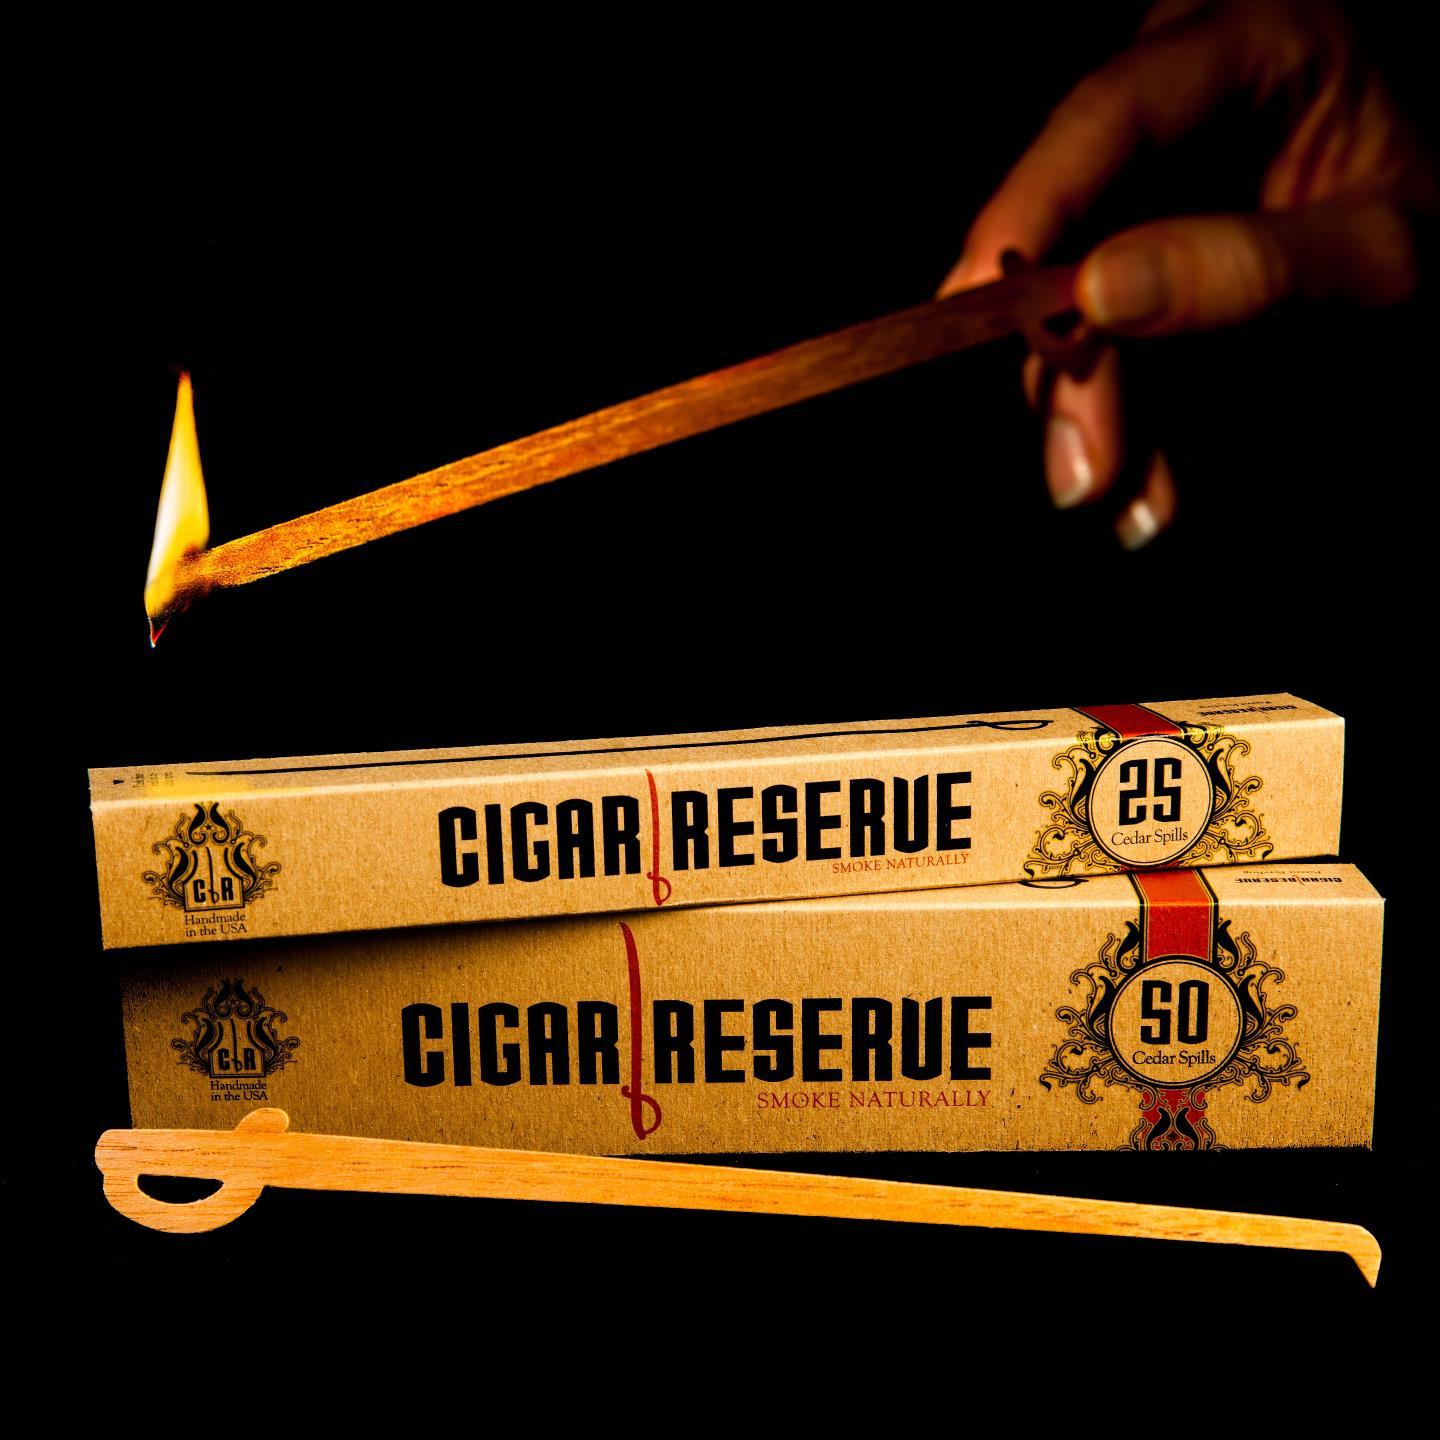 Cigar Reserve Cedar Spills. Smoke naturally and enjoy the true flavors of your cigar without any harmful butane, sulfur or chemicals, the traditional way.